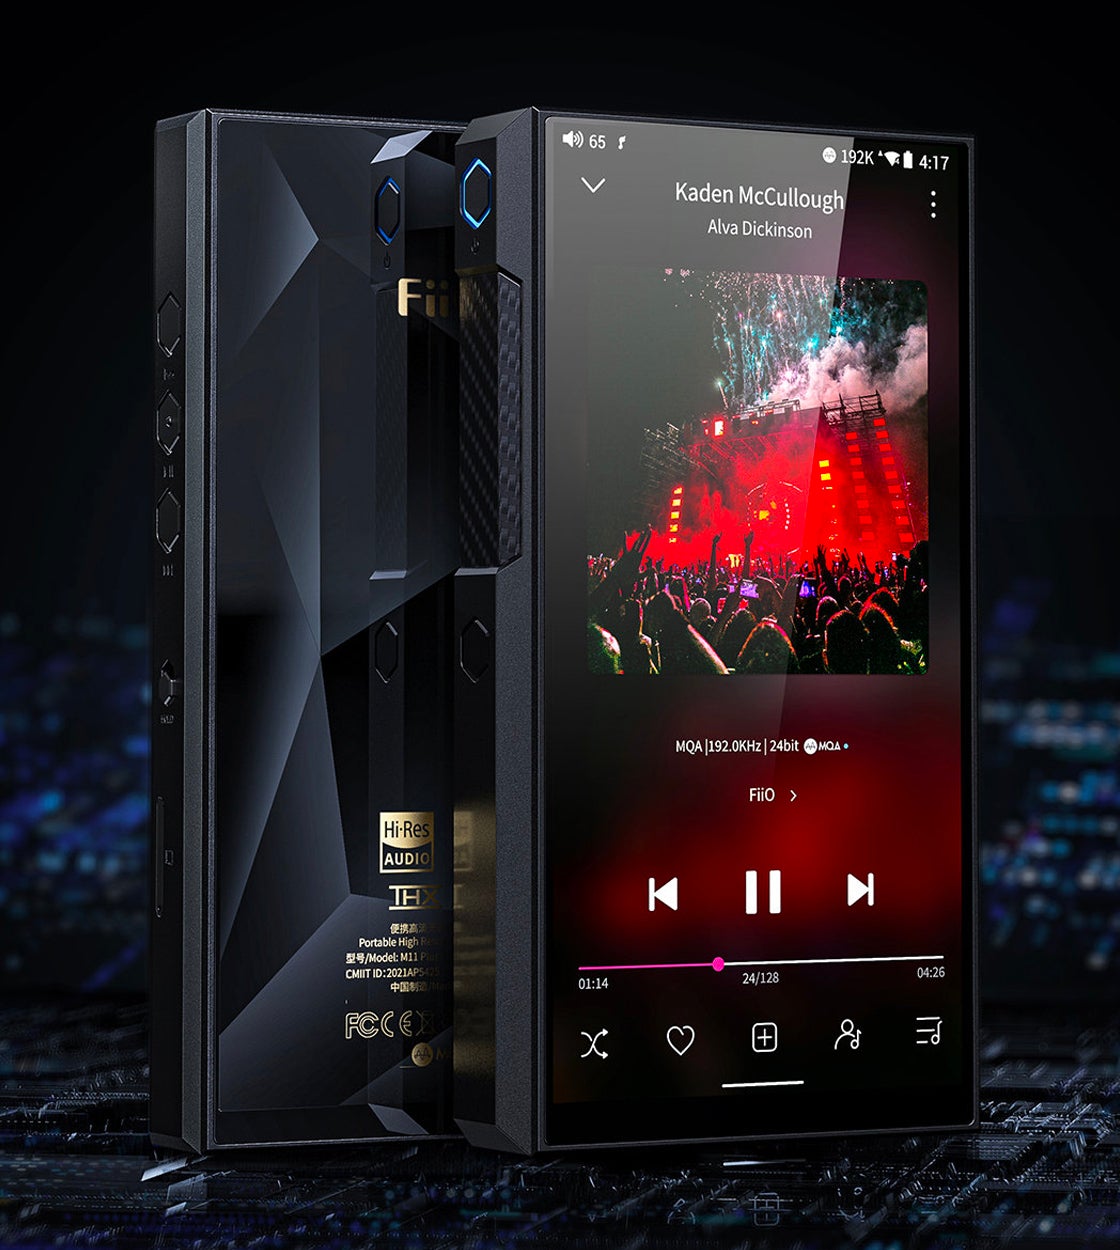 FiiO Releases M11 Plus Android Music Player With ESS Sabre DAC Chipset